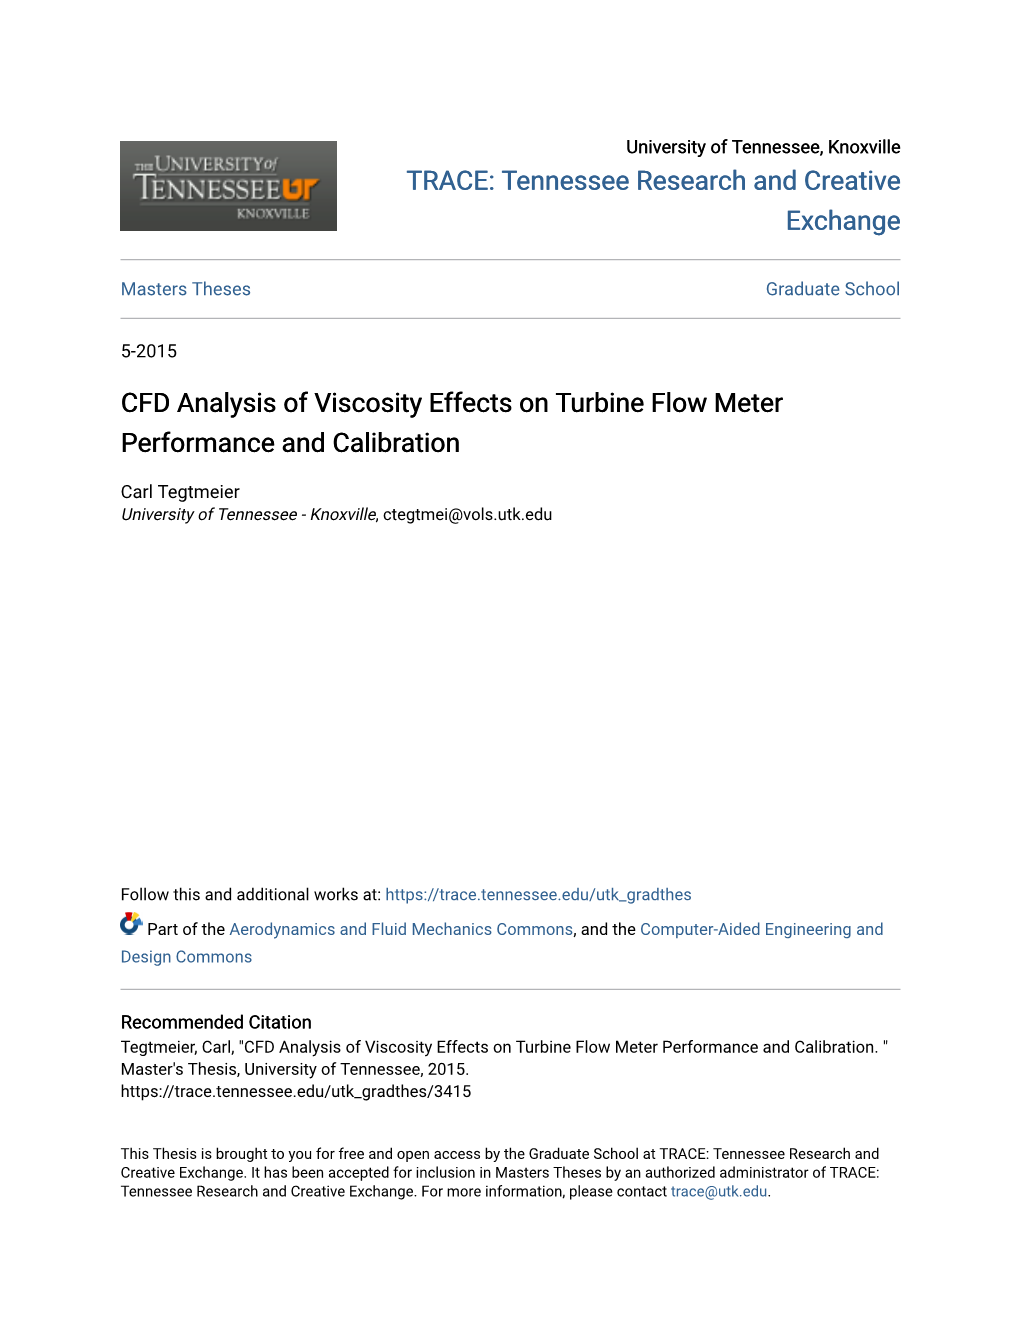 CFD Analysis of Viscosity Effects on Turbine Flow Meter Performance and Calibration